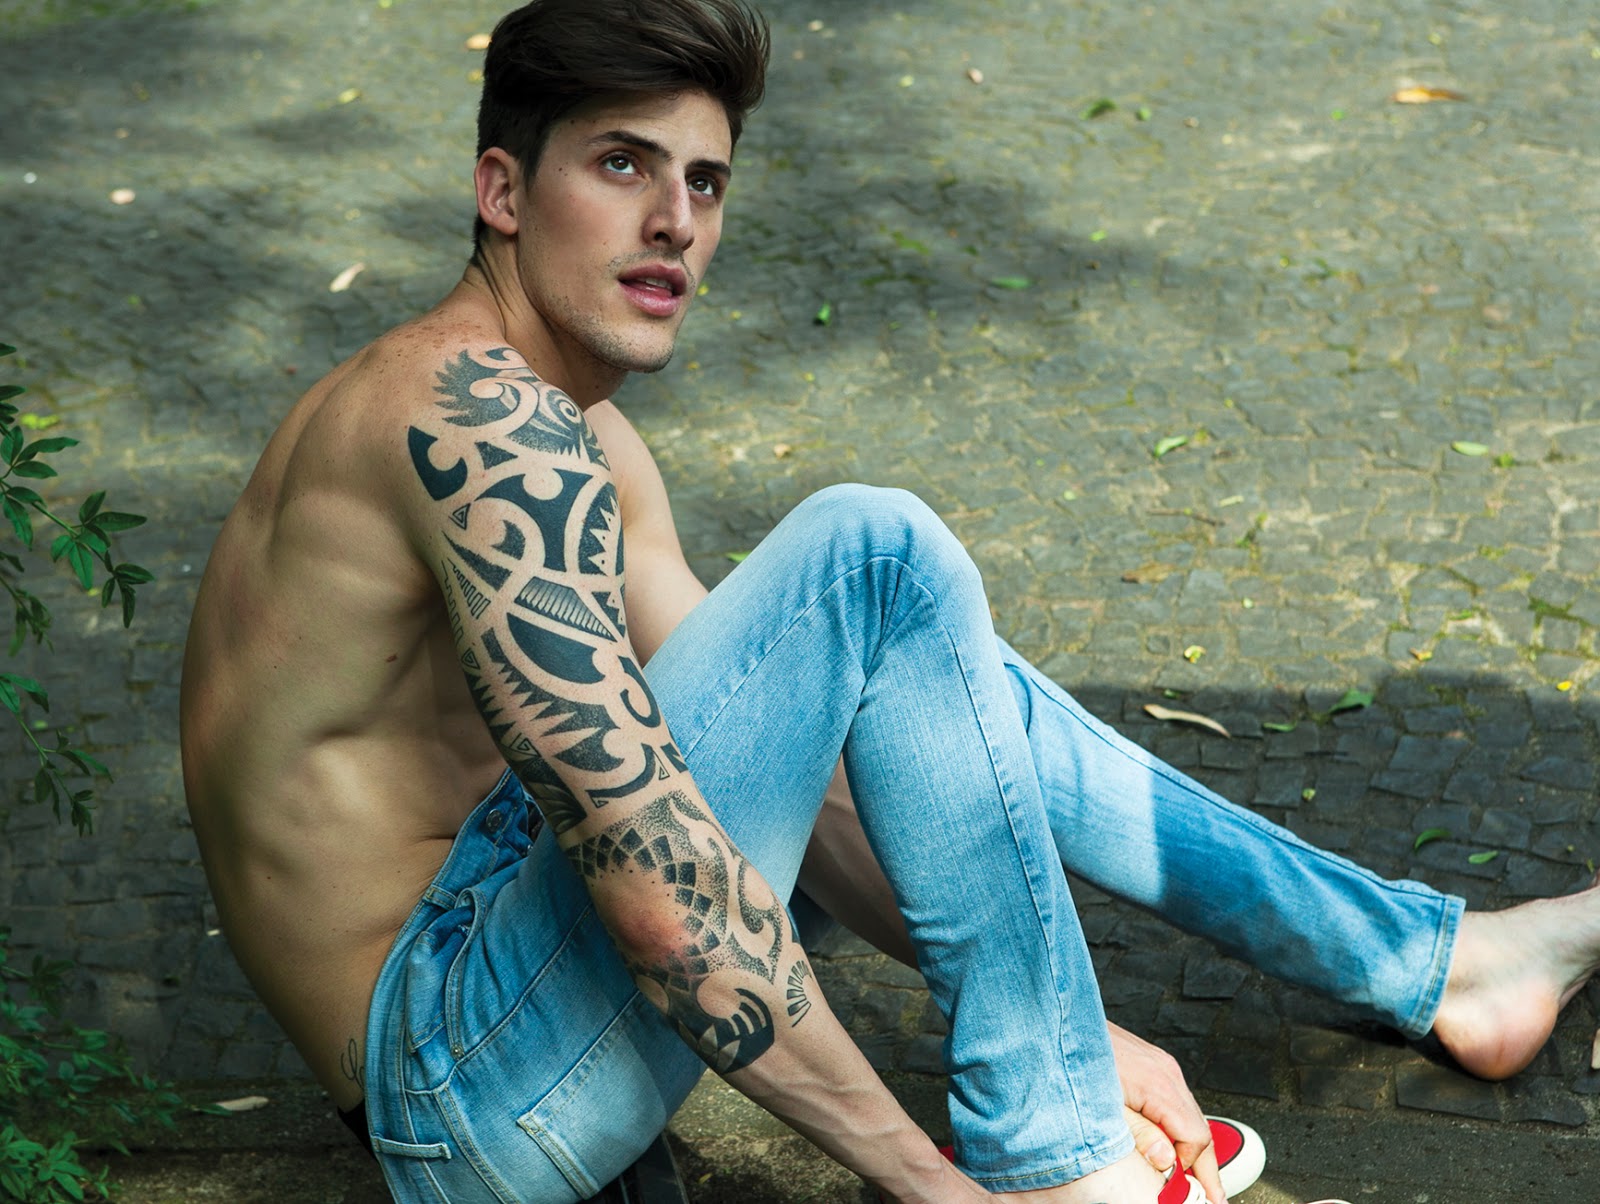 Lovely Danilo Borgato - represented by Closer Models - SWEET TASTE OF YOUTH...